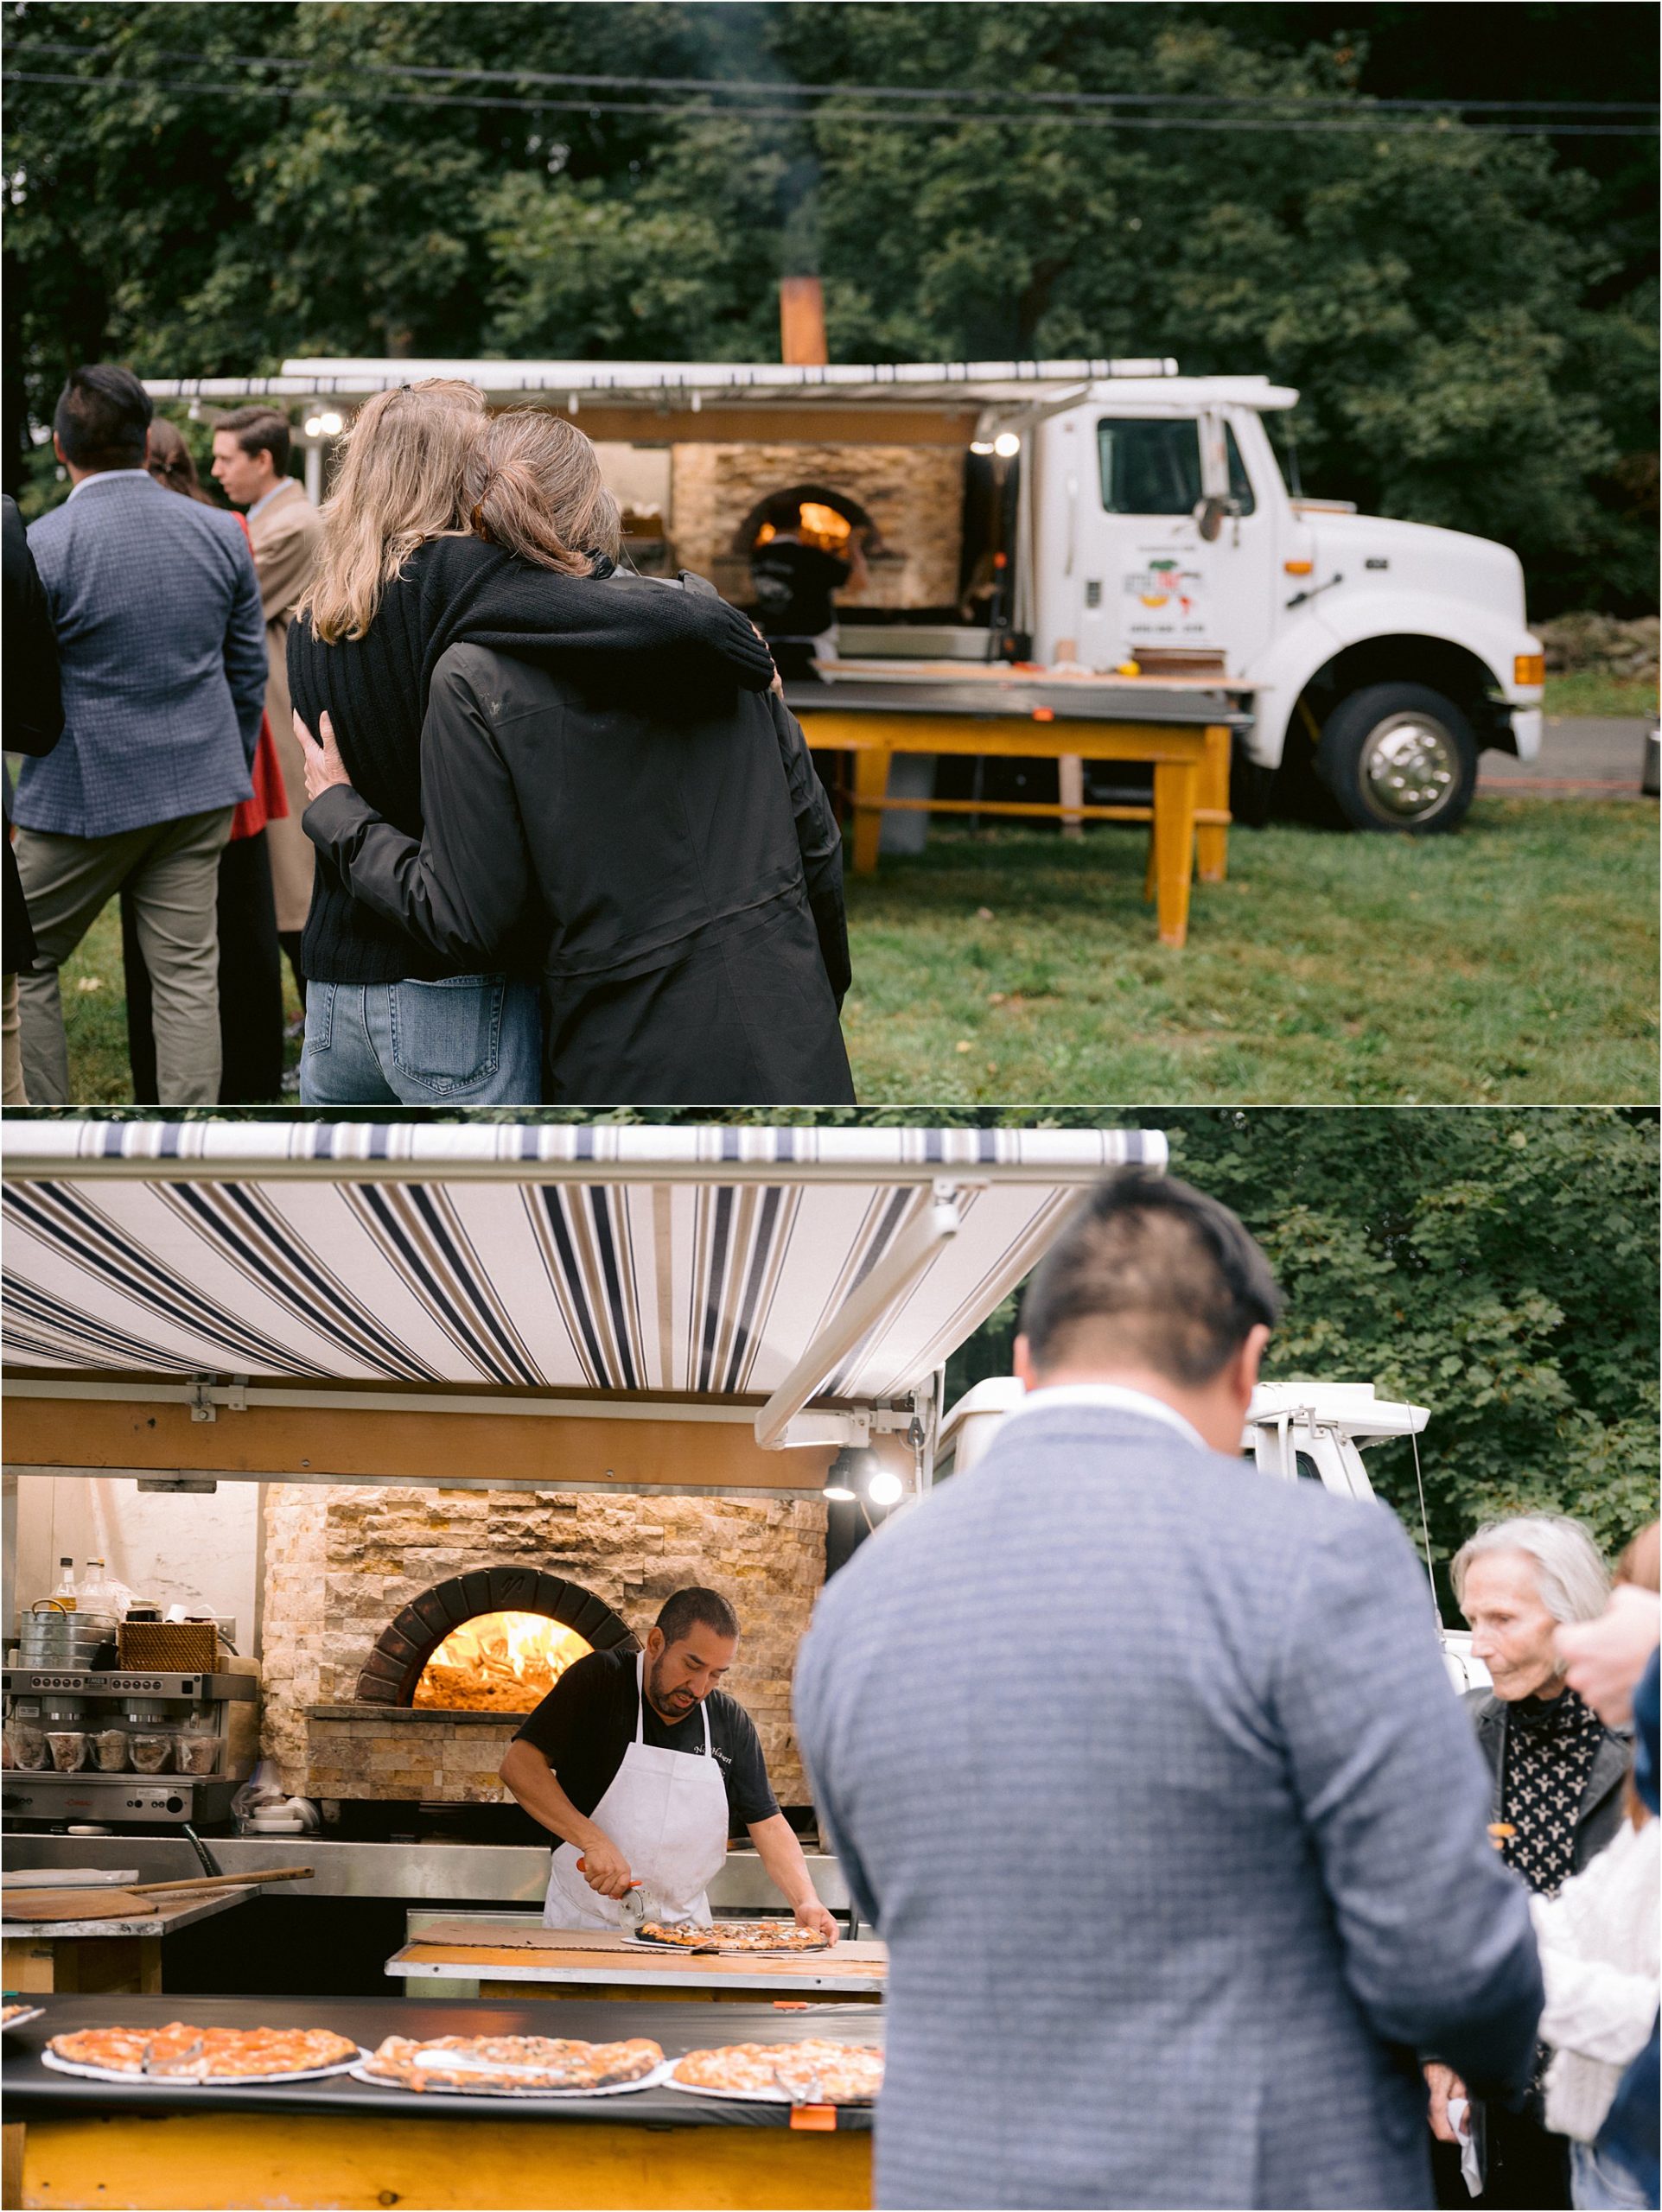 Wedding guests line up for wood-fired pizza from a large white food truck.